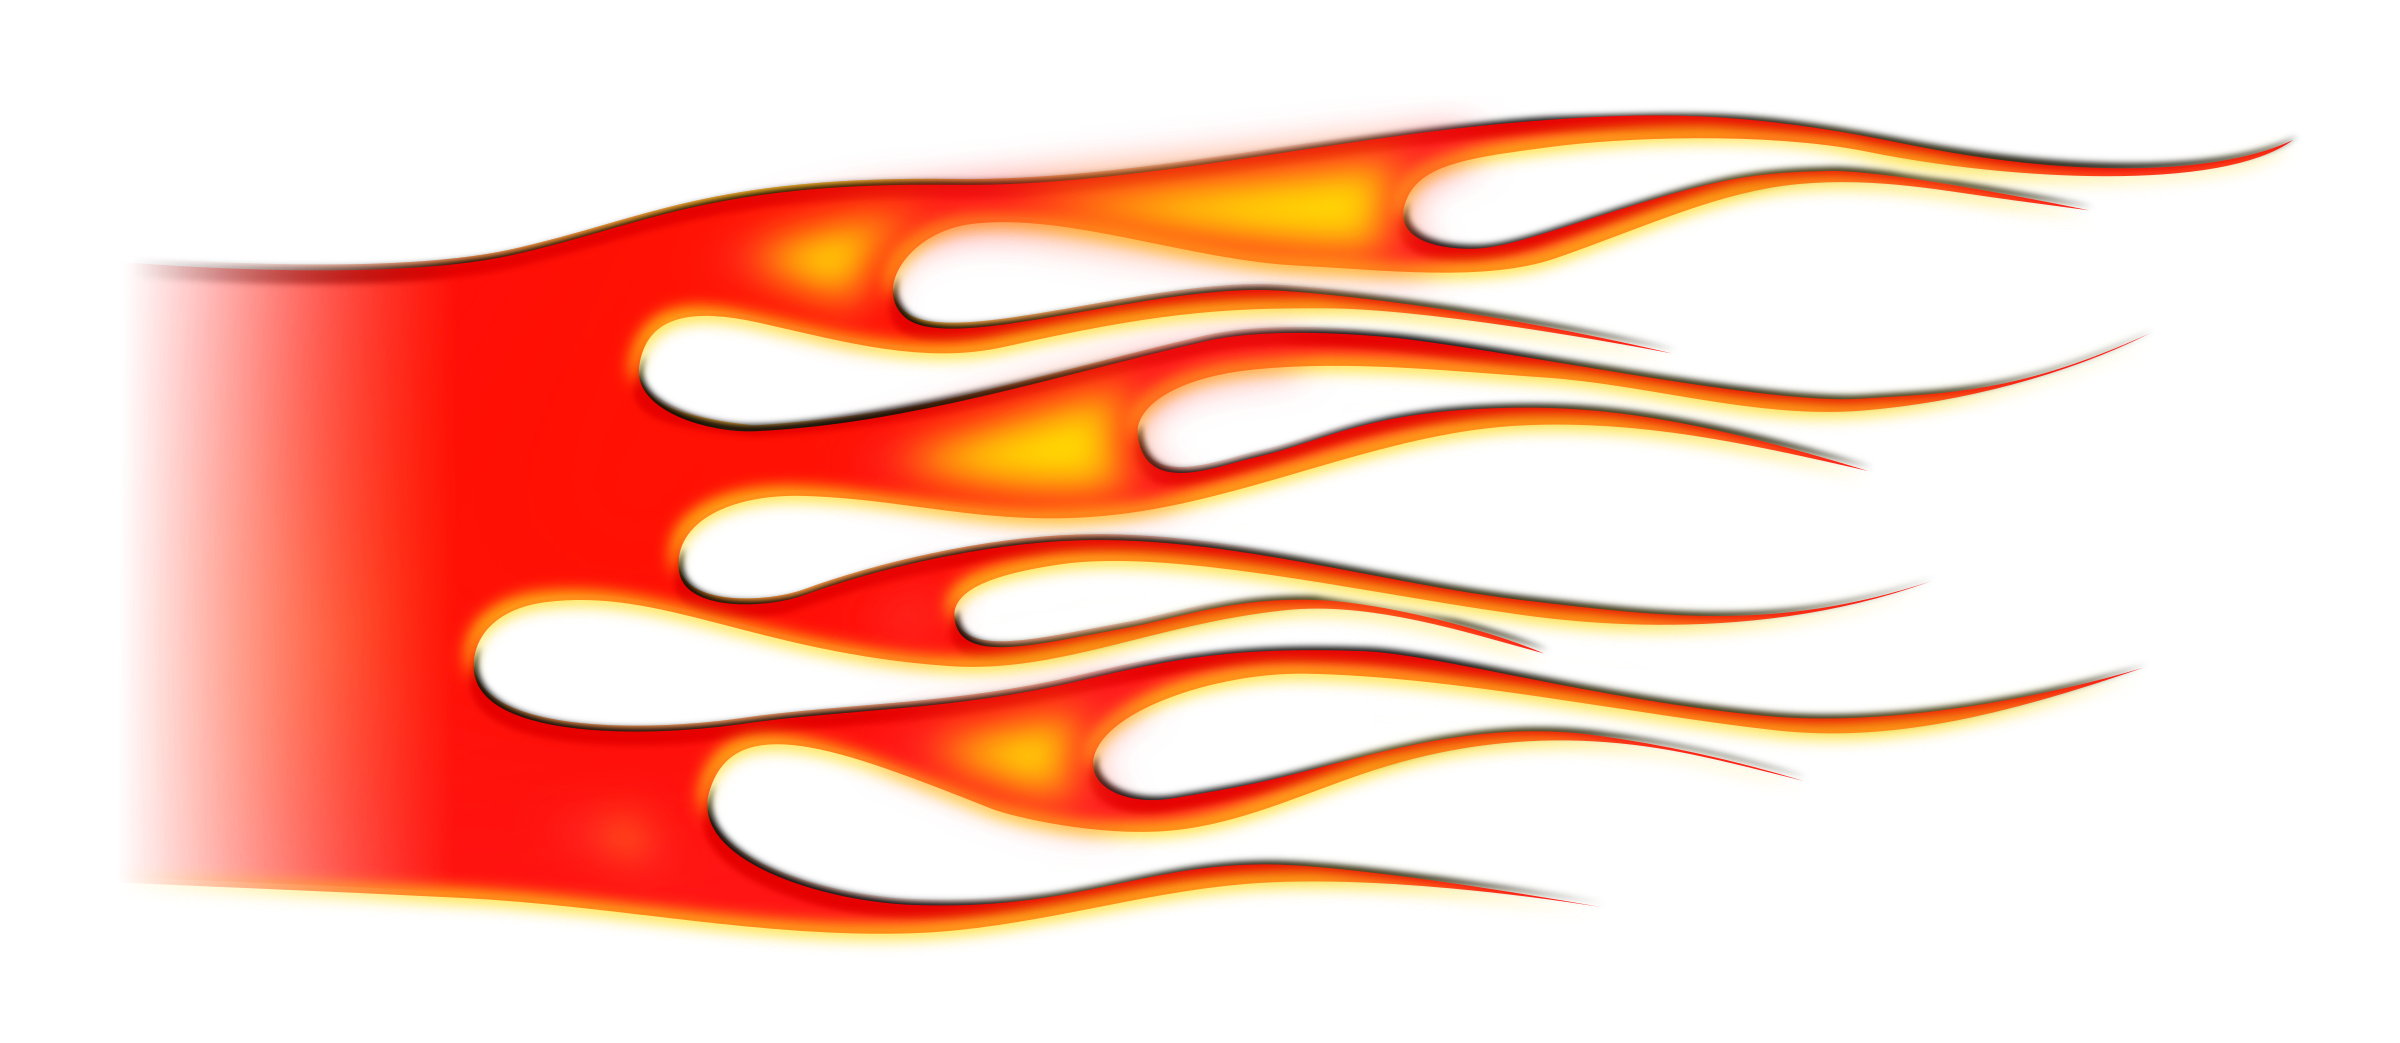 Flames big image png. Flame clipart hot rod